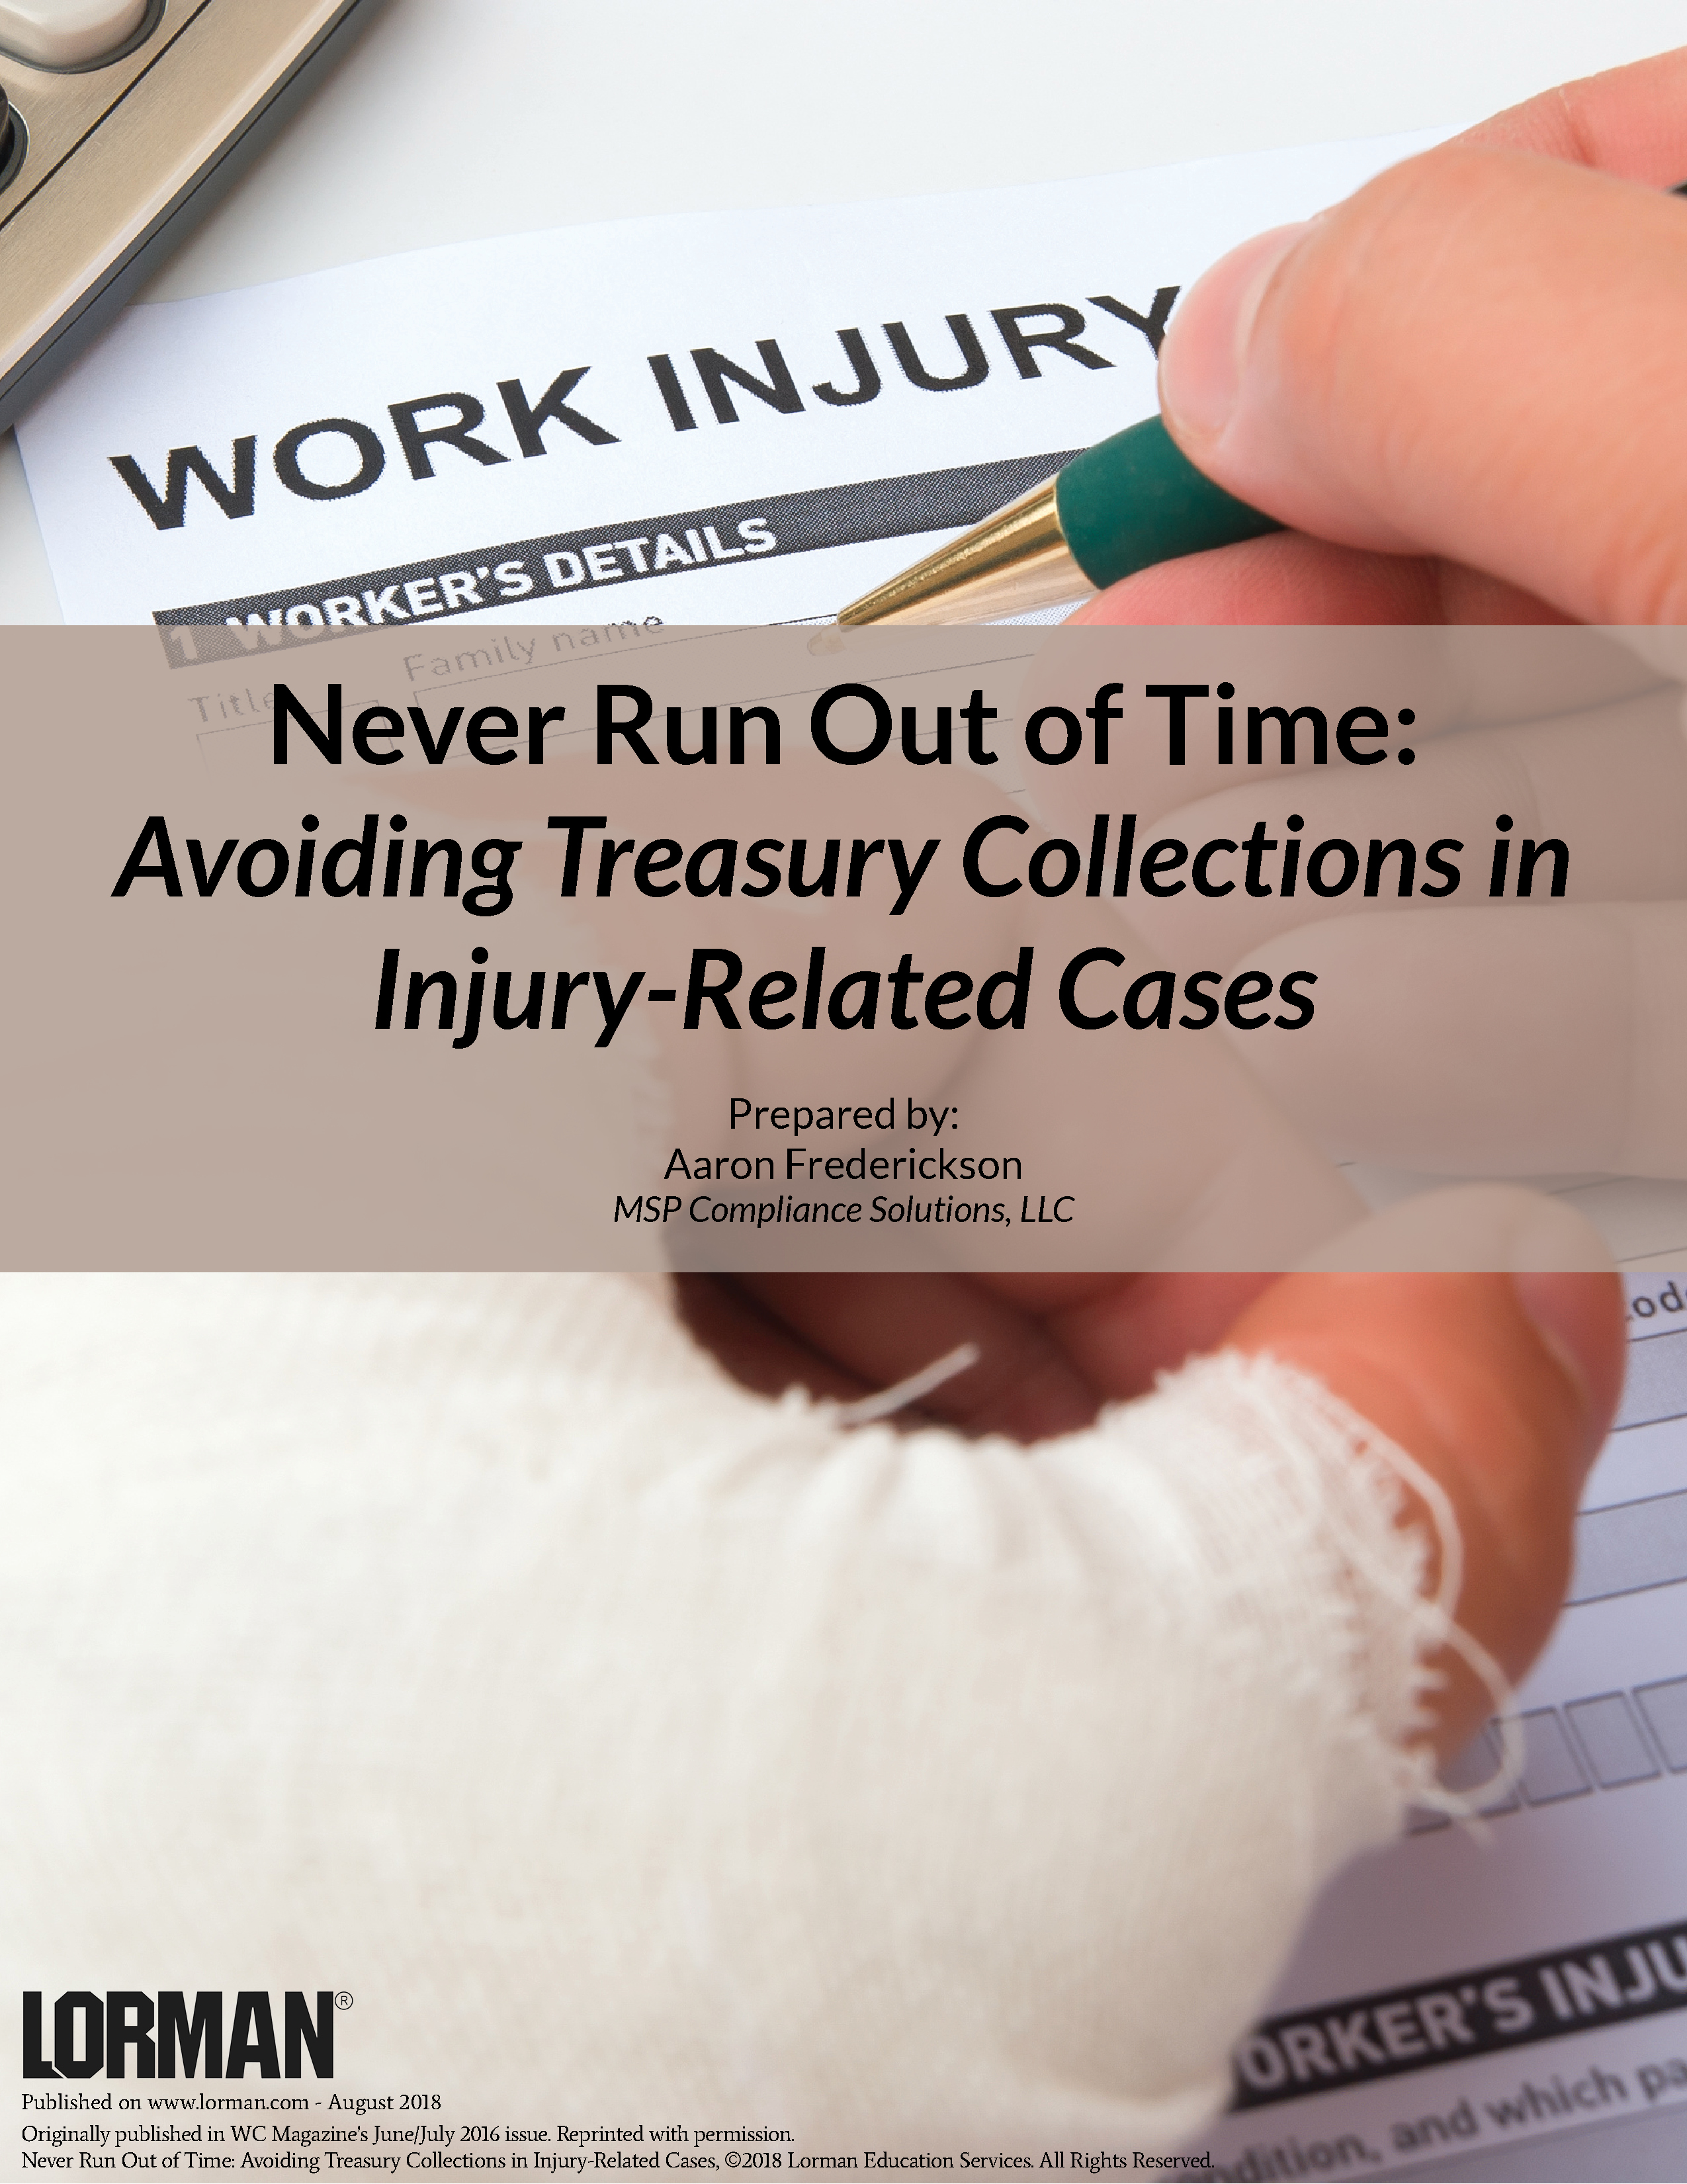 Never Run Out of Time: Avoiding Treasury Collections in Injury-Related Cases